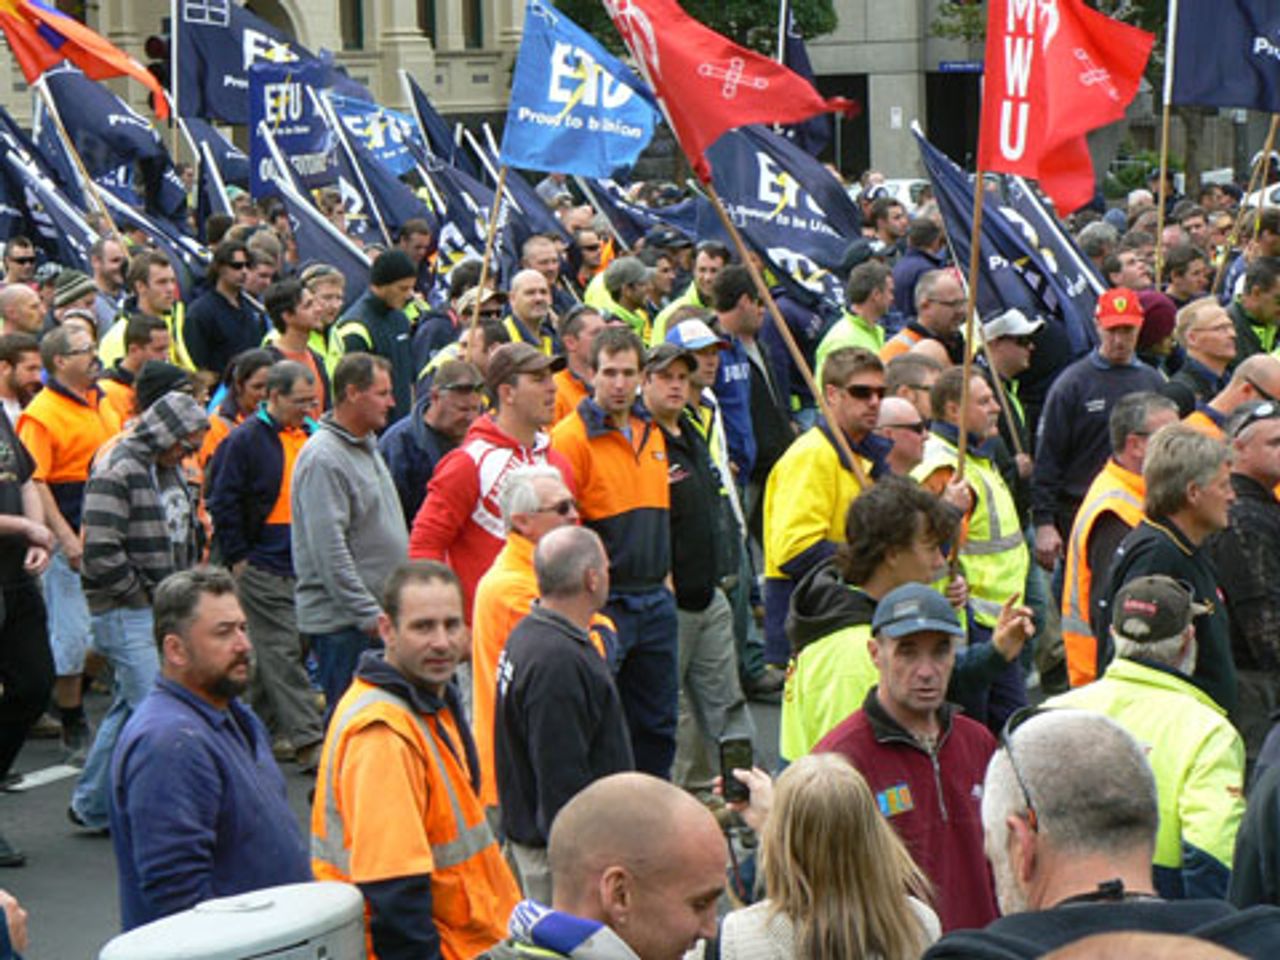 A section of the rally in Melbourne